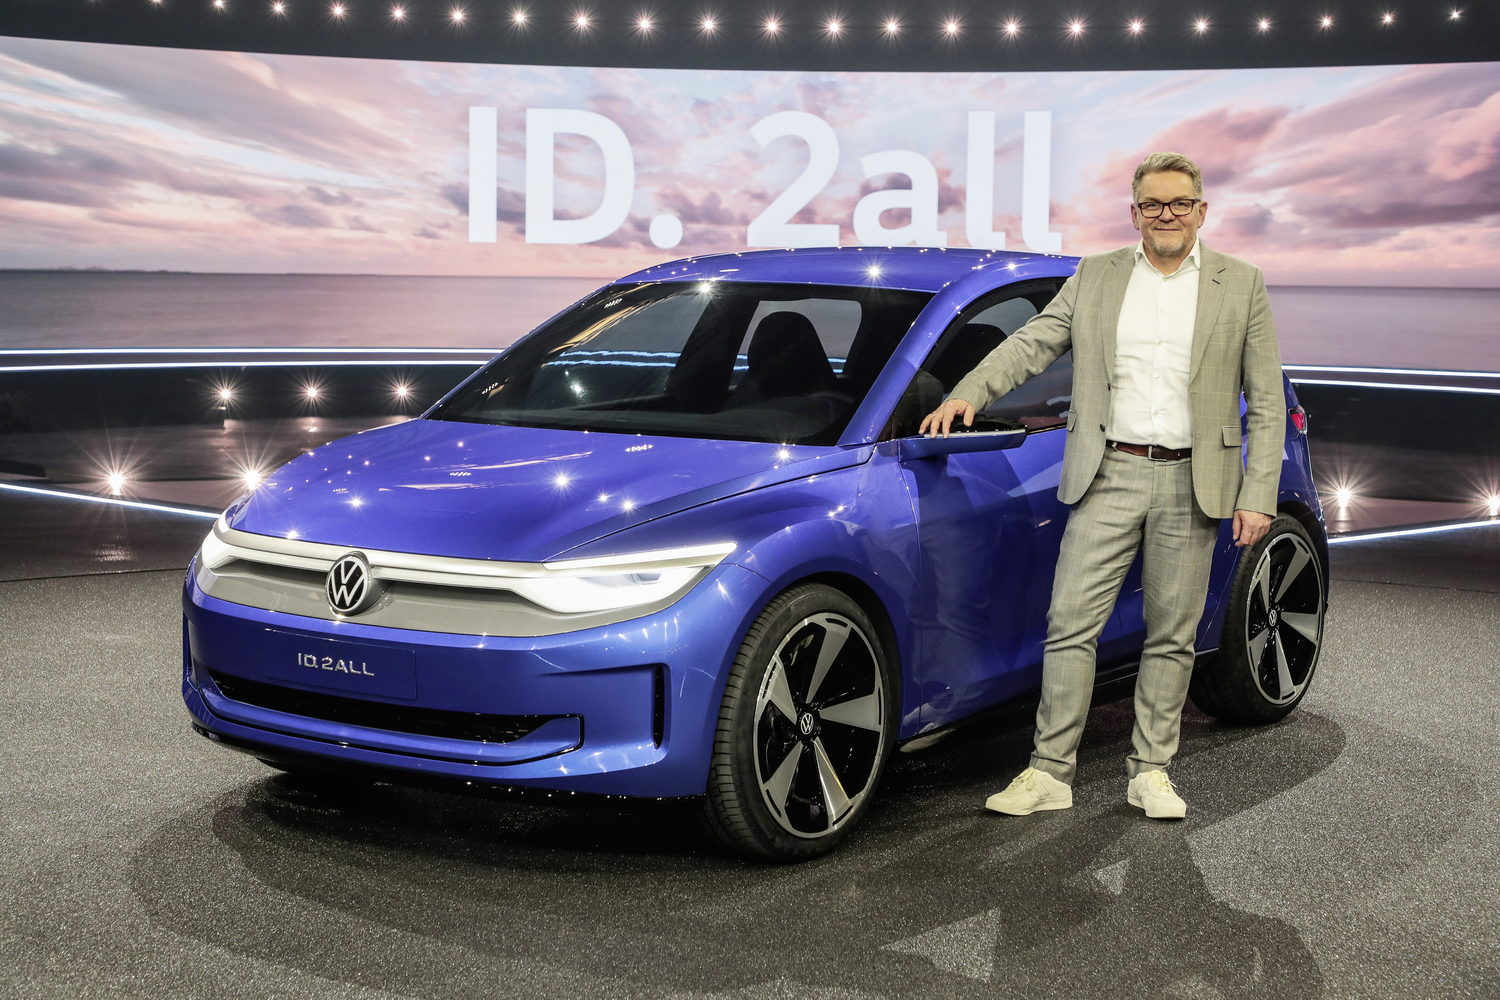 Complete Car Features | Volkswagen's design chief on the ID. 2all